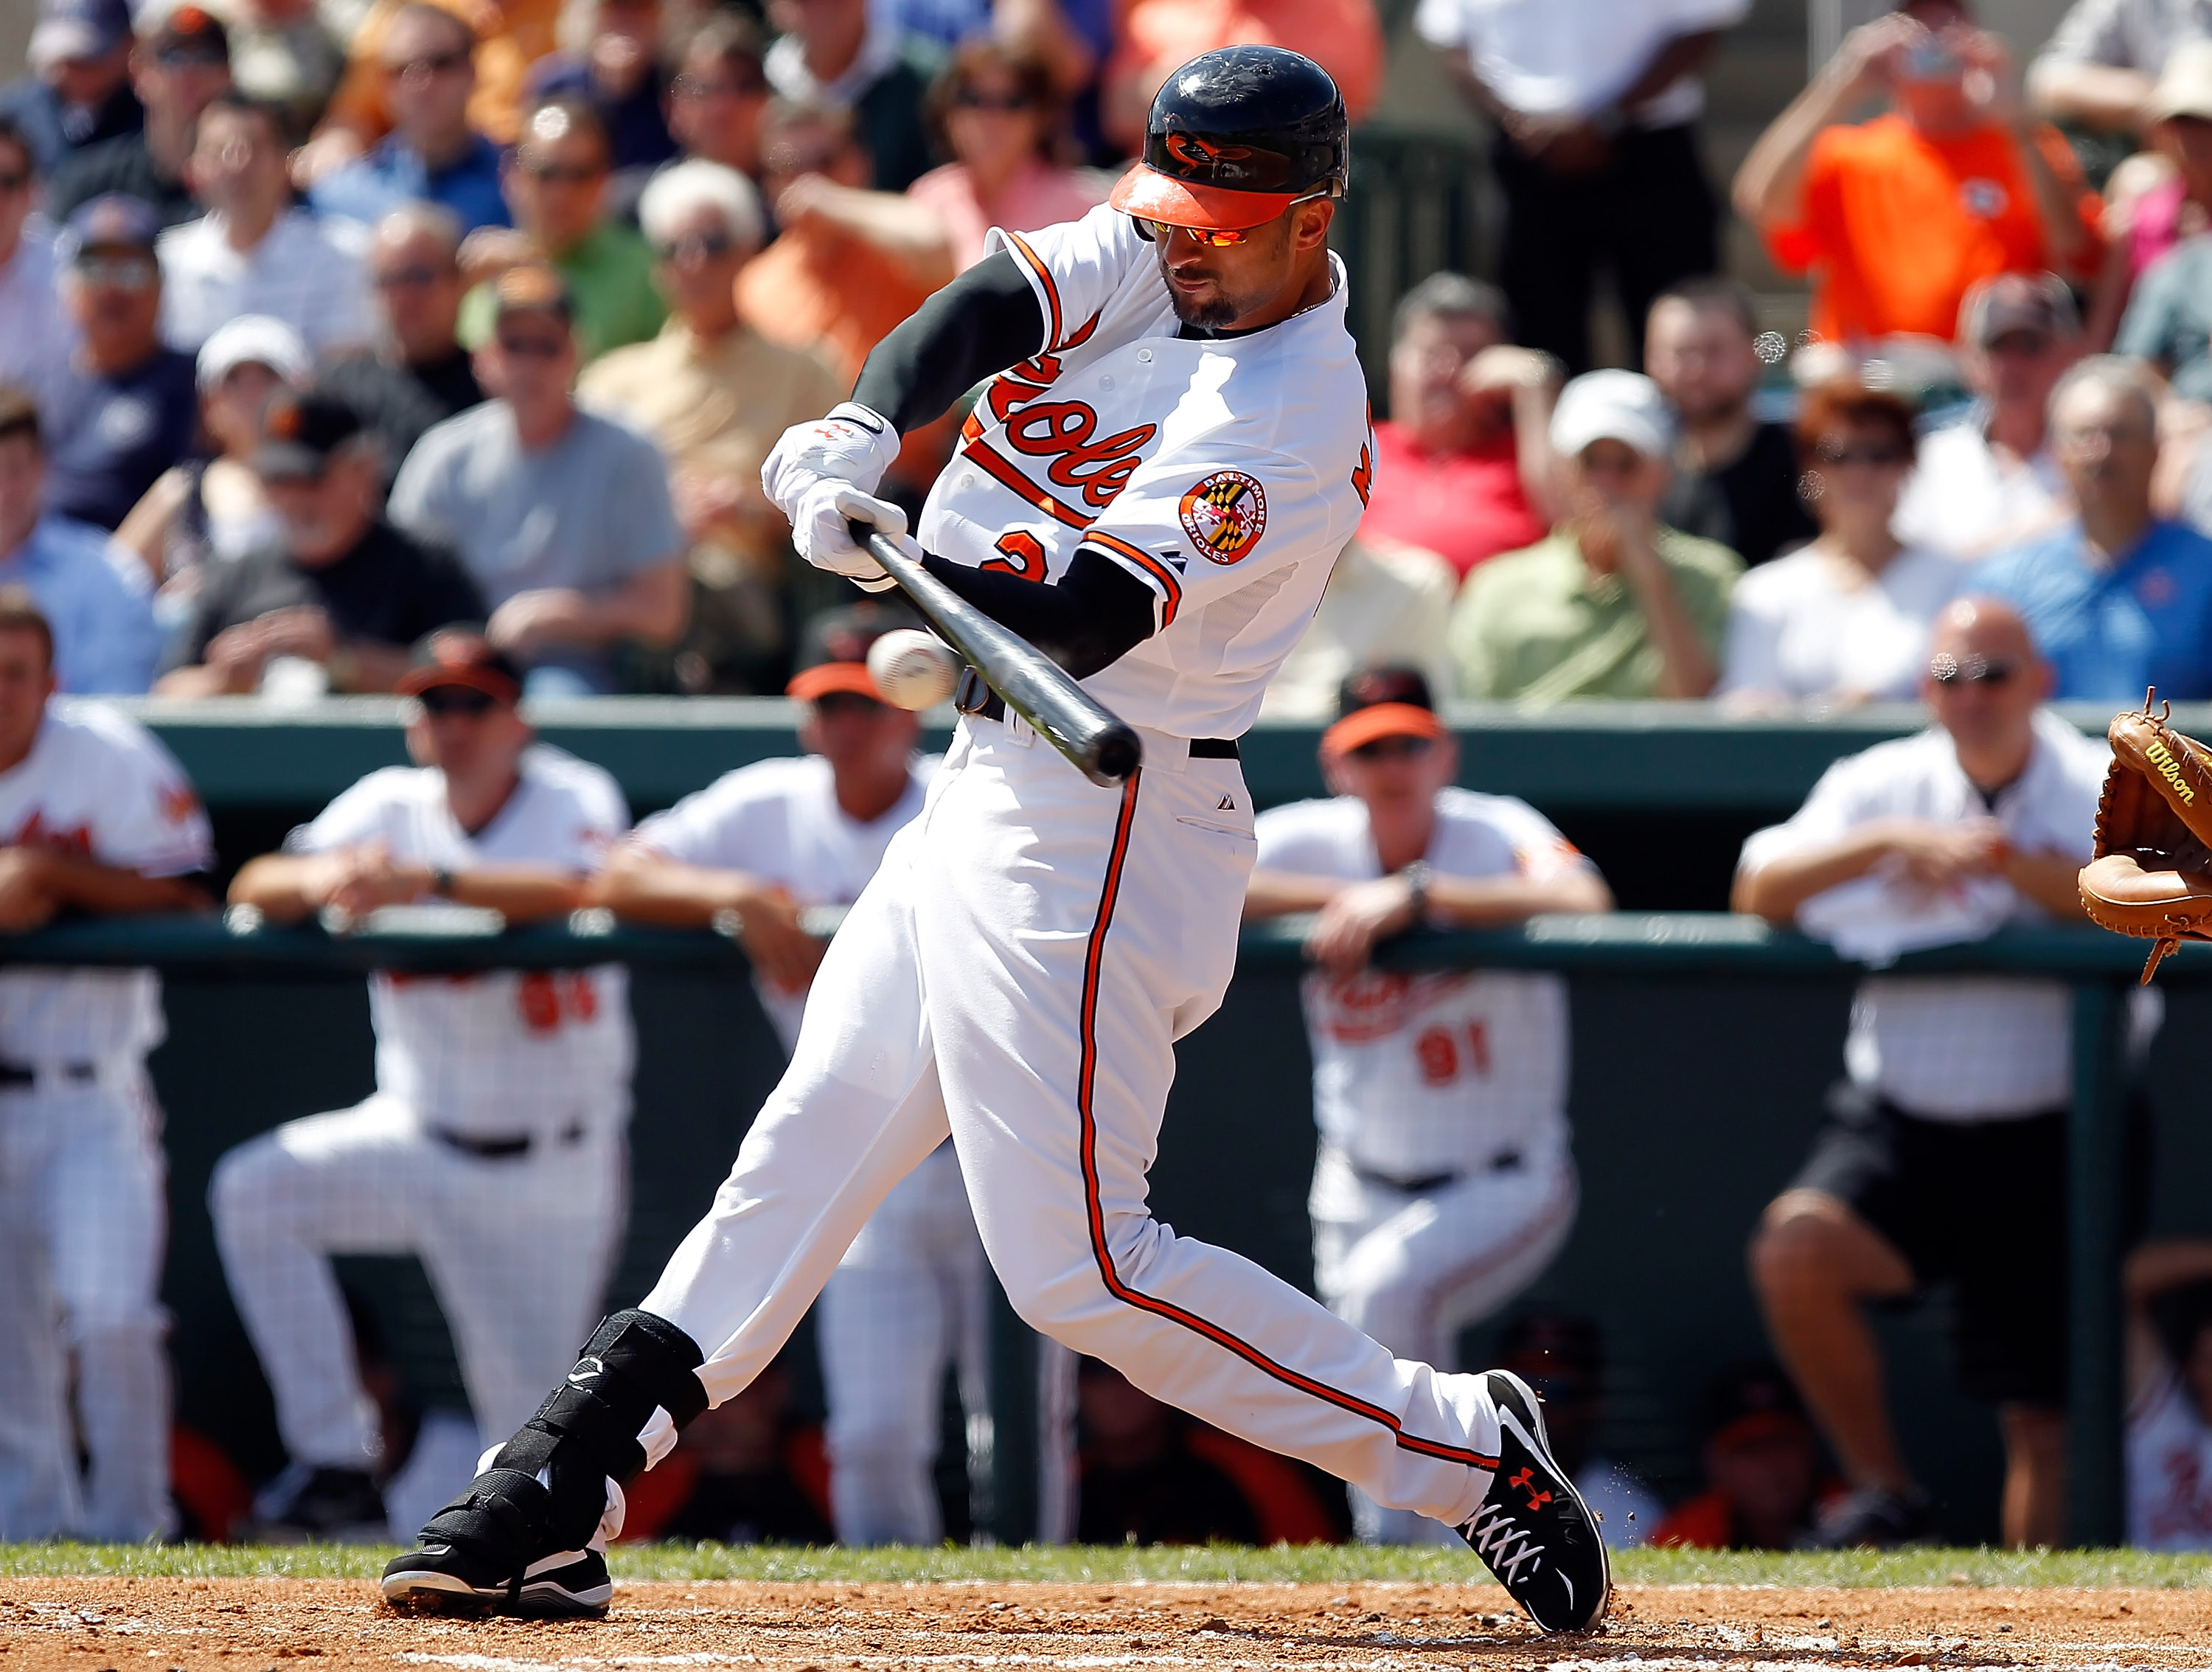 Nick Markakis on Orioles: 'Don't believe a word they say